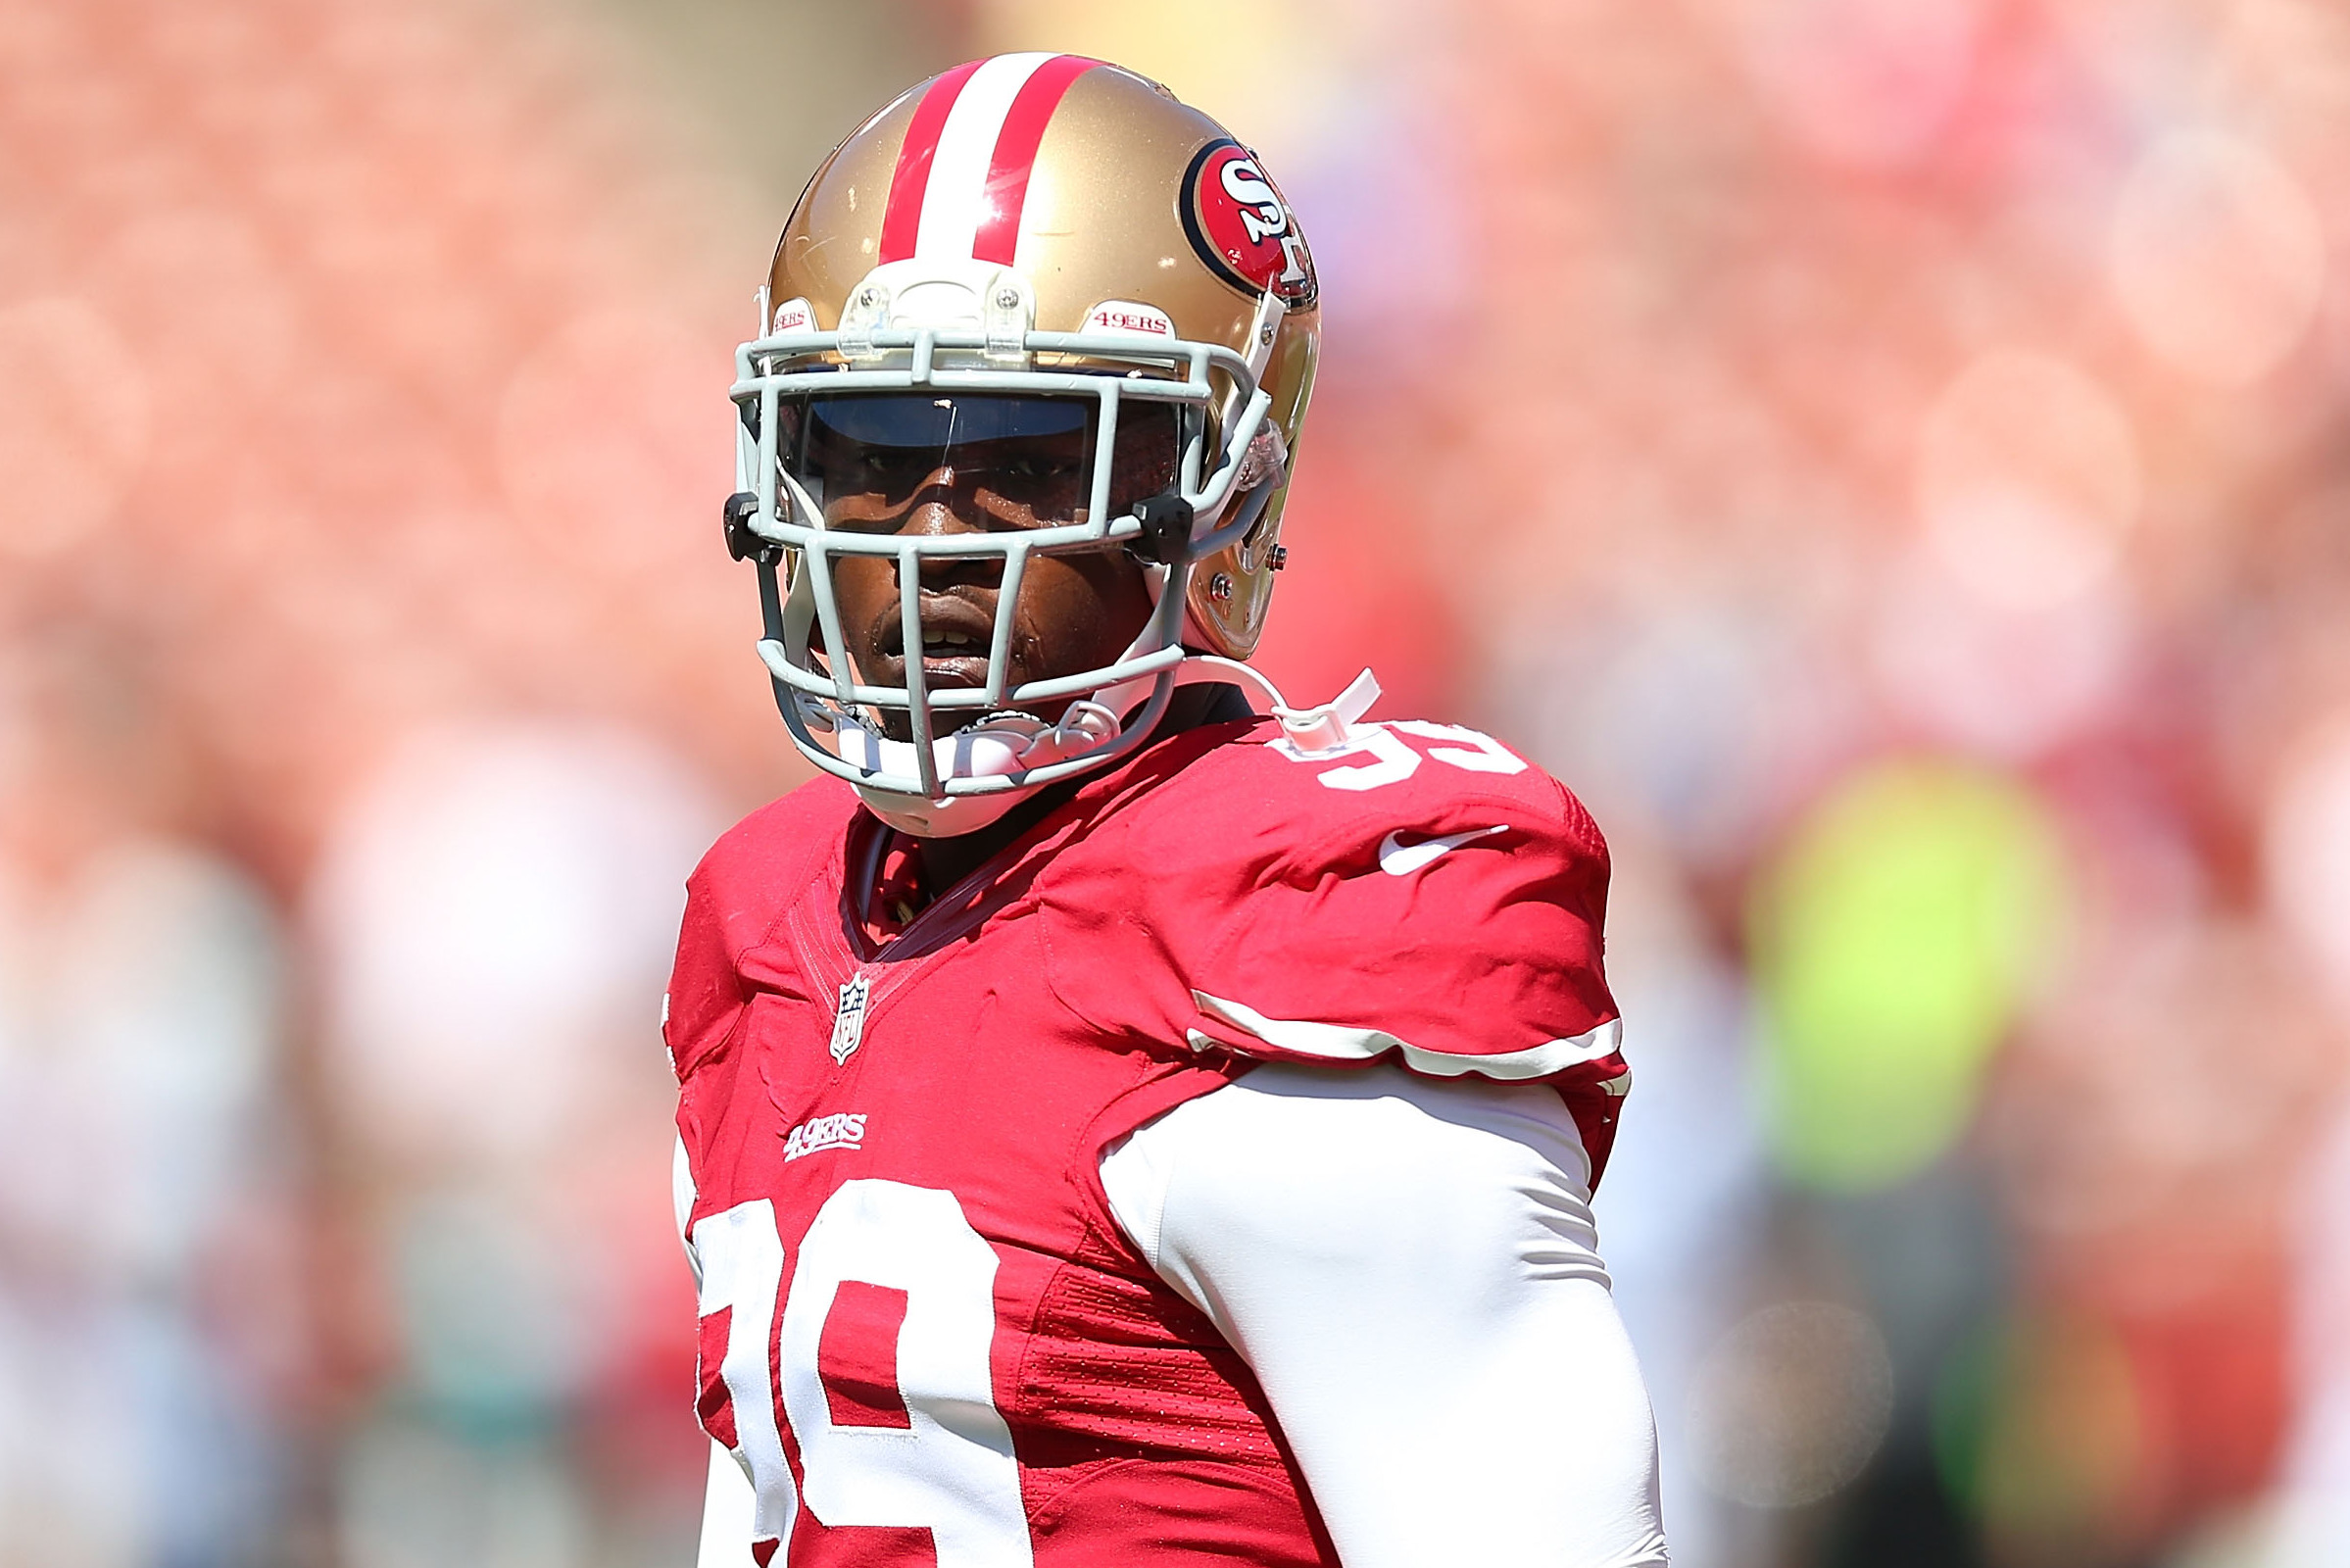 Twitter Reacts as Aldon Smith Is Suspended 9 Games by NFL